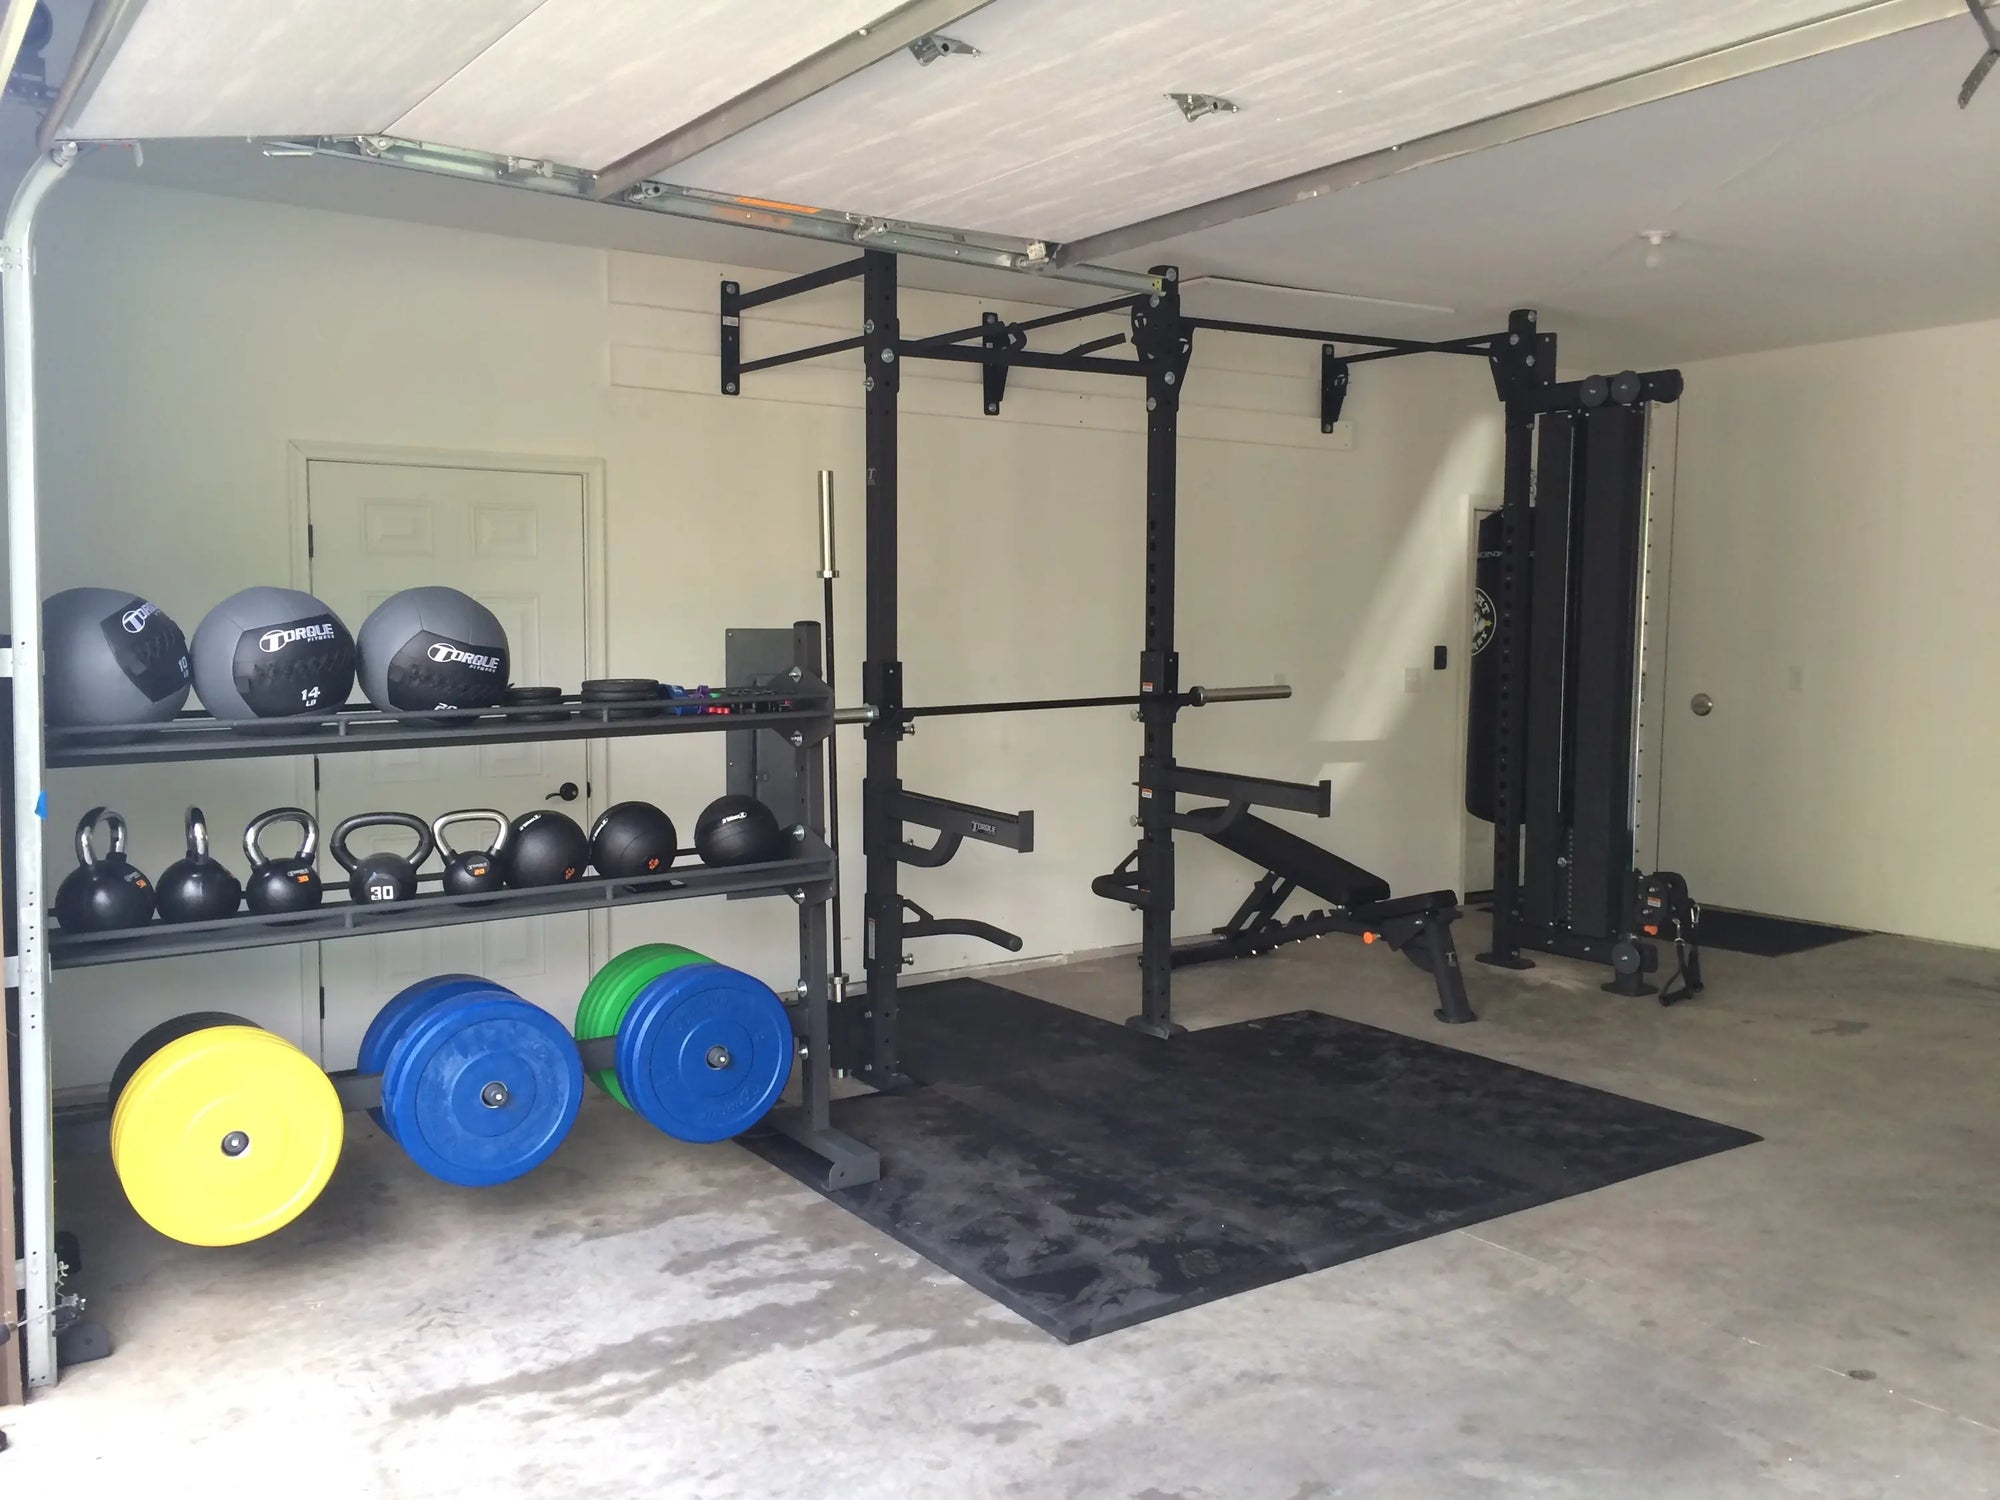 A Garage Gym Outfitted with Torque Home Gym Equipment